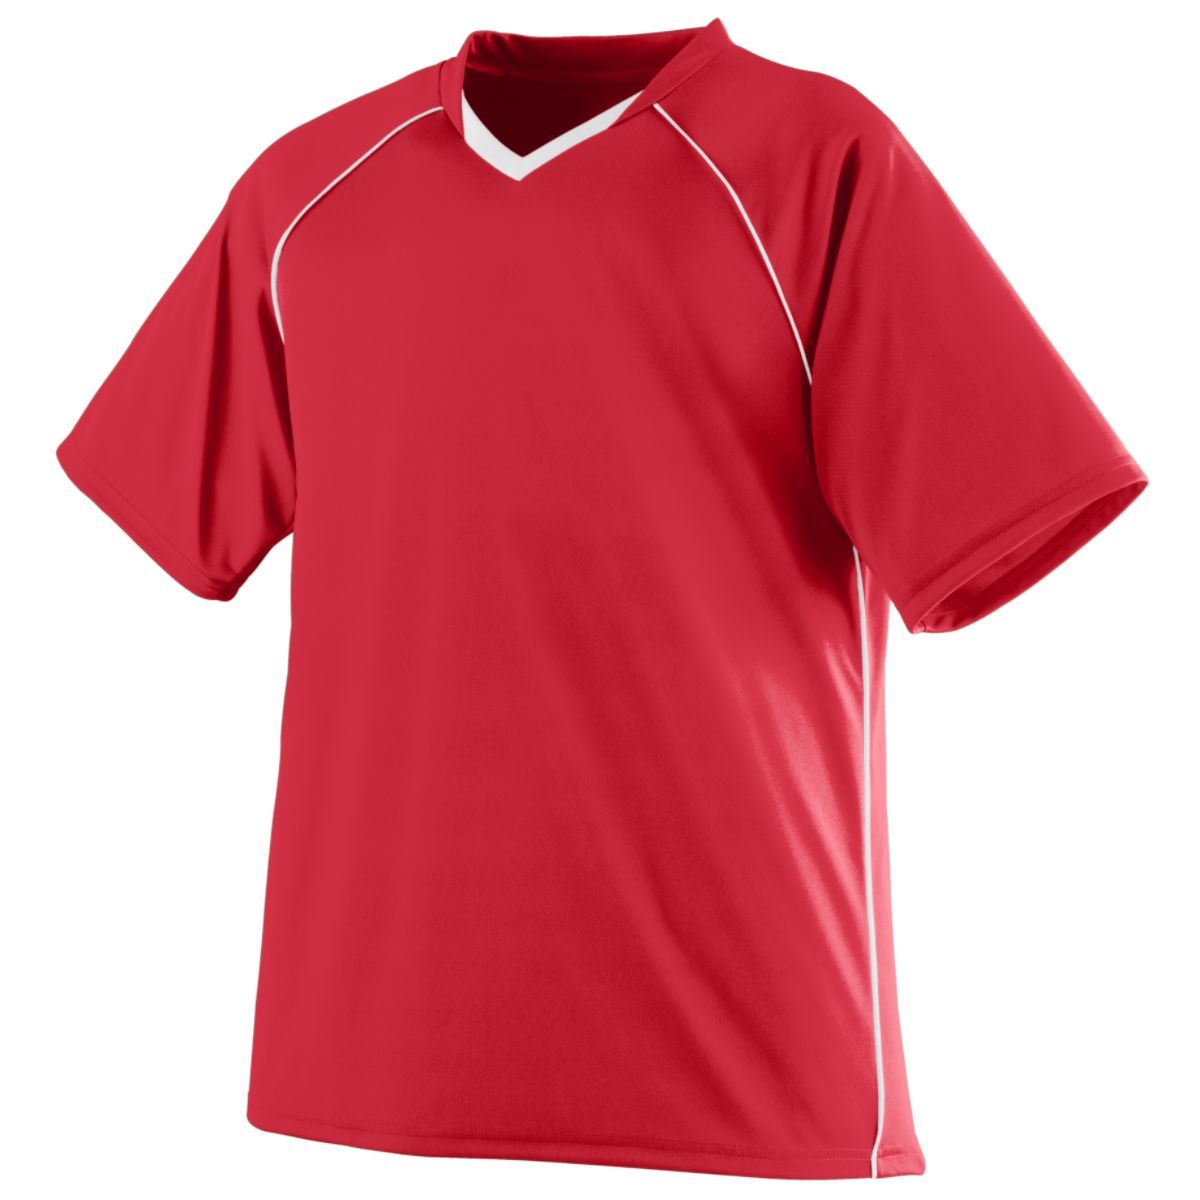 Augusta Sportswear Striker Jersey in Red/White  -Part of the Adult, Adult-Jersey, Augusta-Products, Soccer, Shirts, All-Sports-1 product lines at KanaleyCreations.com